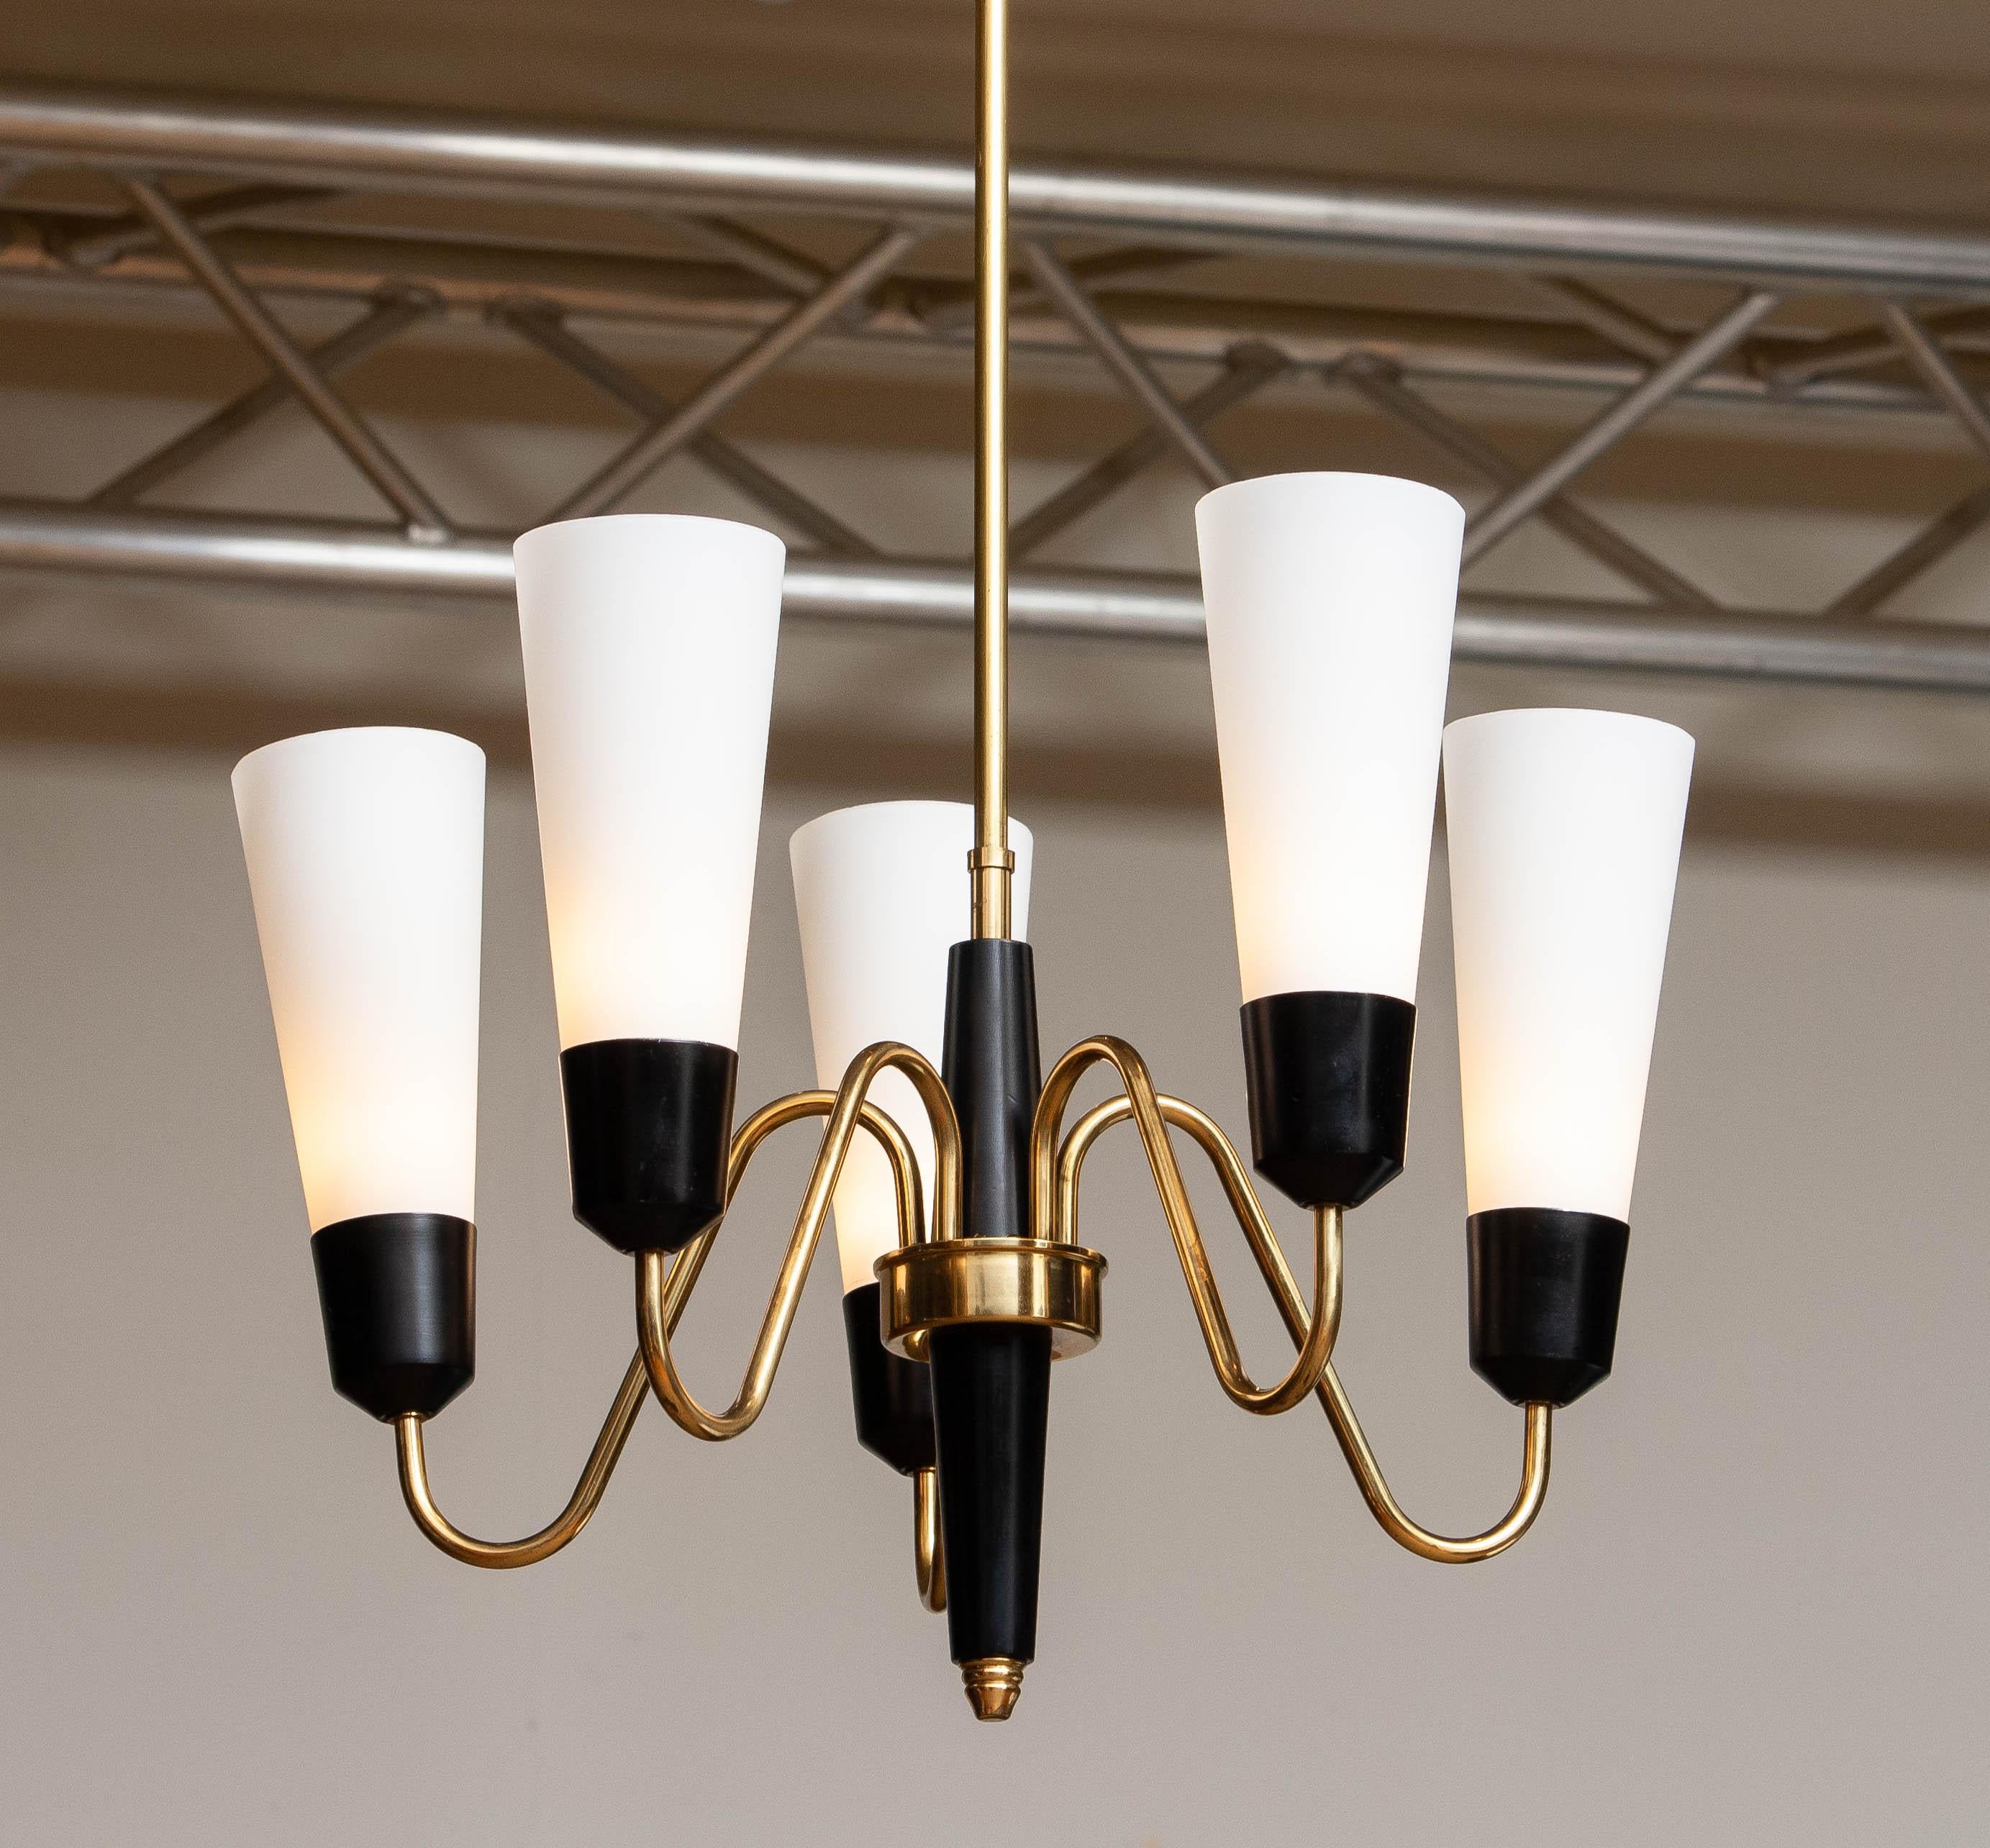 1960's Brass and Black Italian Chandelier with Slim White Frosted Glass Vases In Good Condition In Silvolde, Gelderland